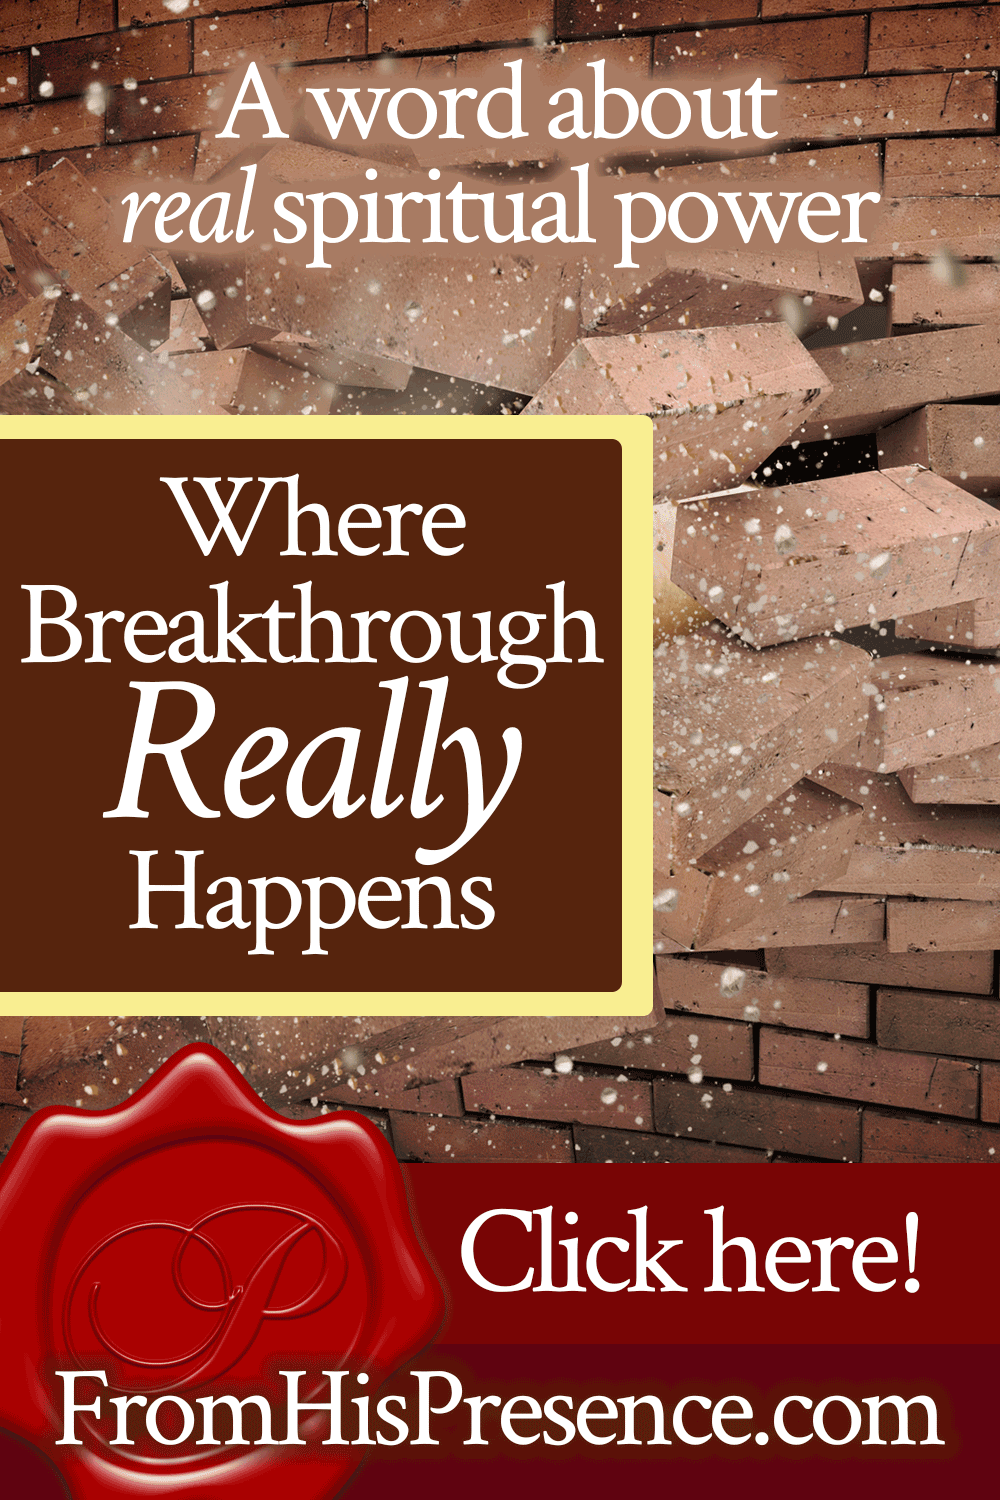 Where Breakthrough Really Happens | Encouraging Word by Jamie Rohrbaugh | FromHisPresence.com